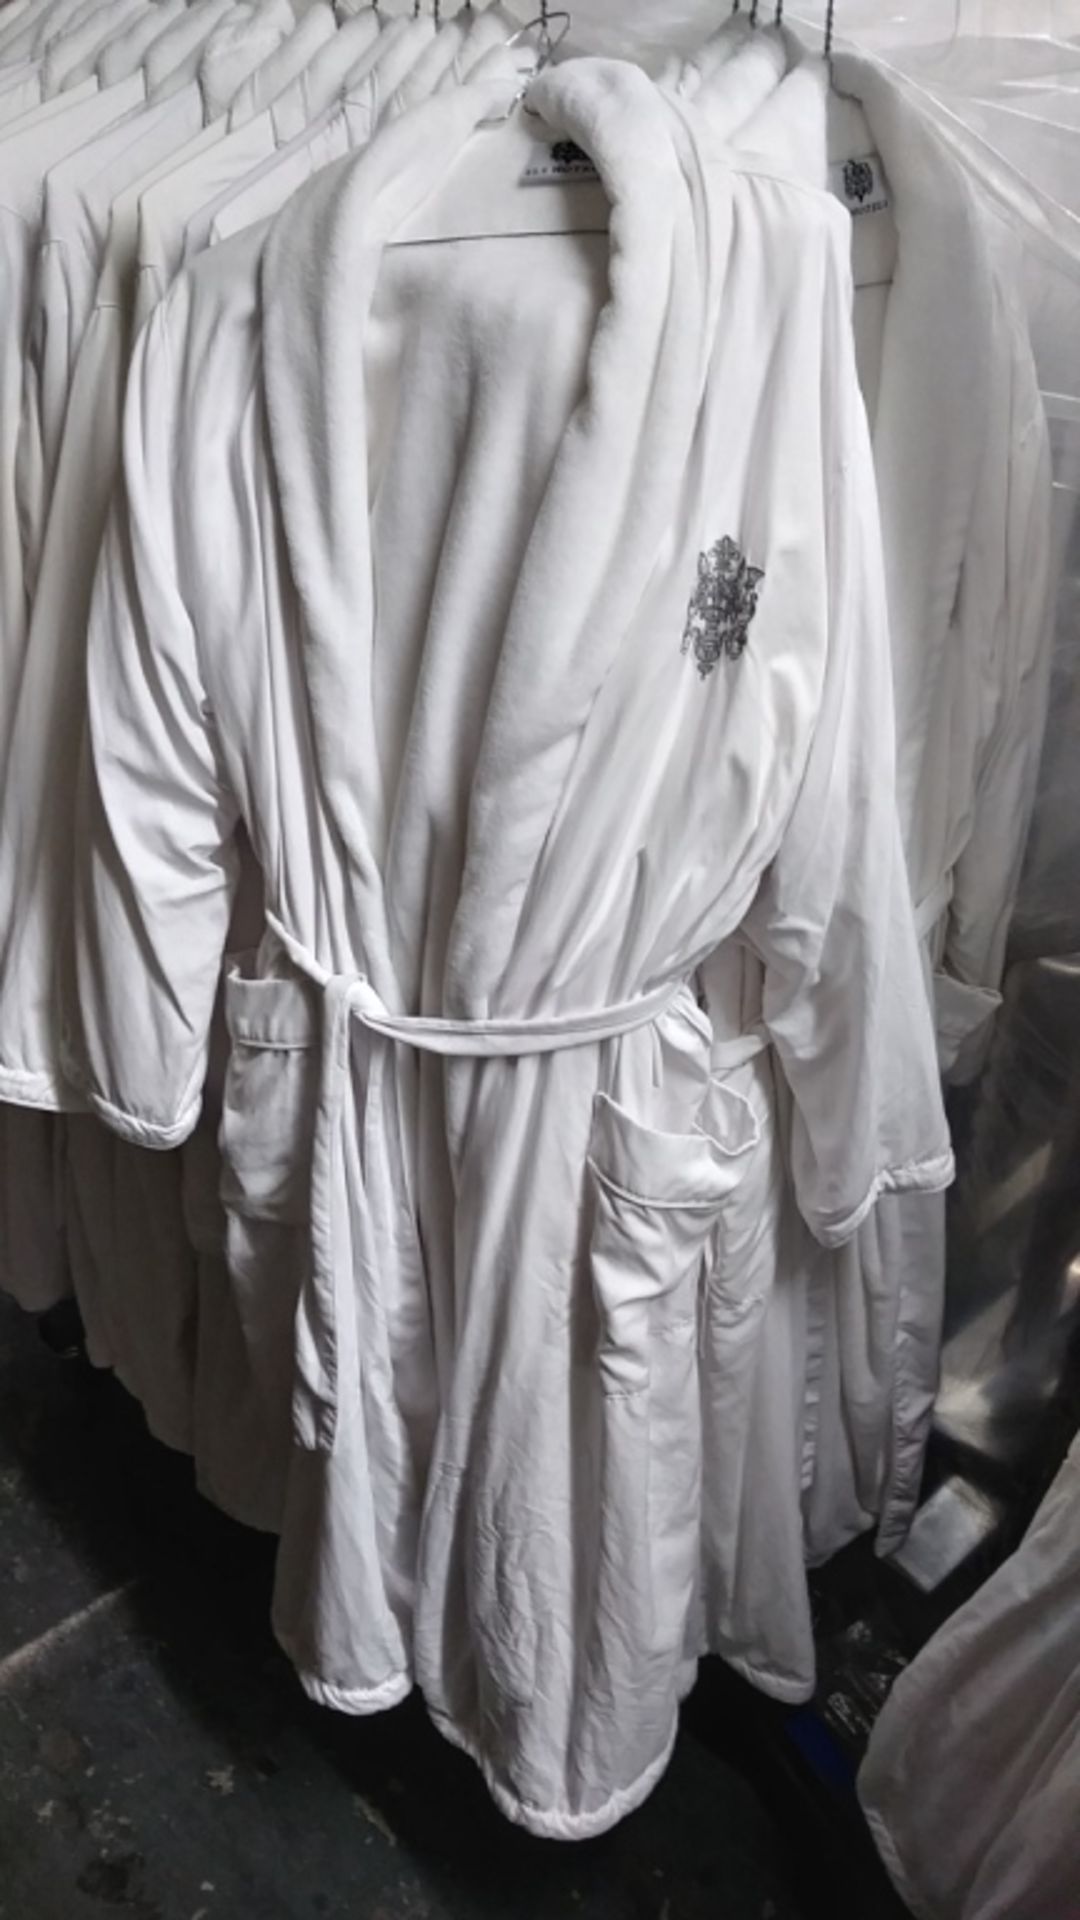 Used White Bath Robes - Assorted Sizes (INCLUDES 20 ROBES) - Image 4 of 5